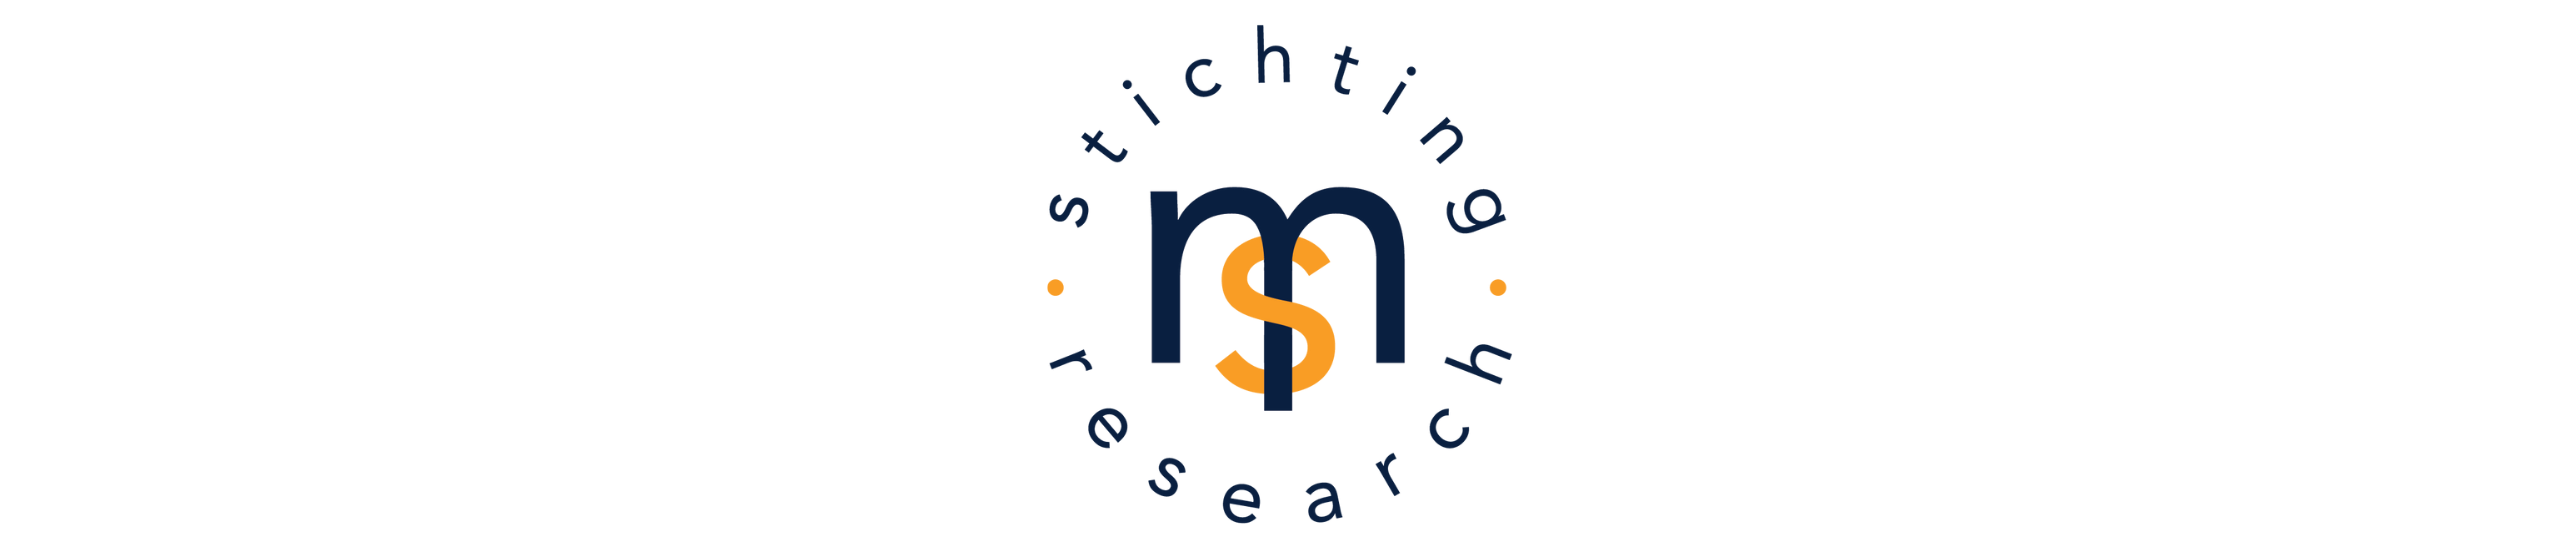 Stichting MS Research